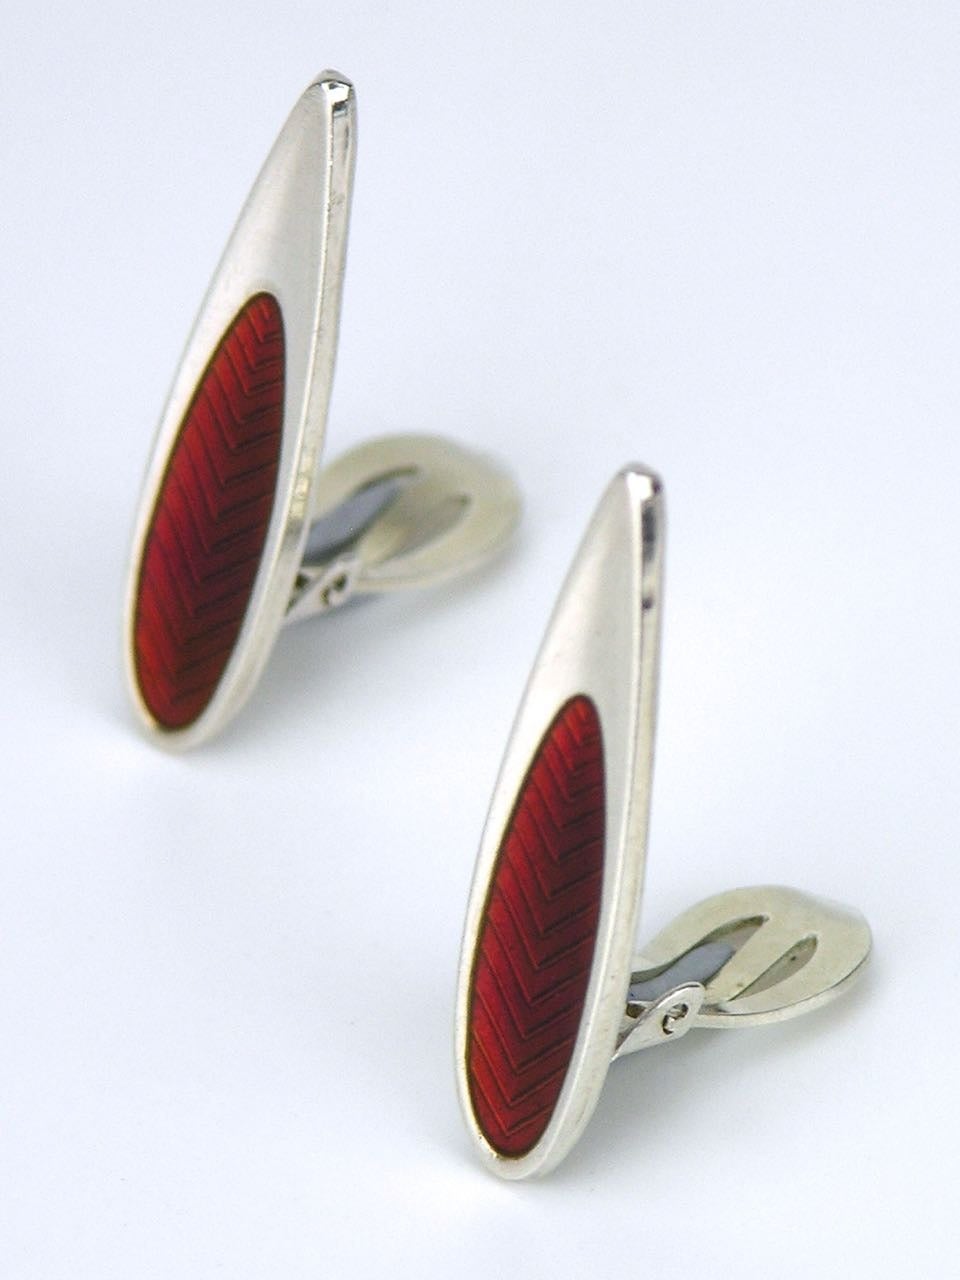 A pair of solid silver and red enamel modernist teardrop shape clip earrings; each earring consisting of a slightly concave elongated leaf shape with a smaller panel of red enamel over a chevron guilloche pattern and a clip fitting to the